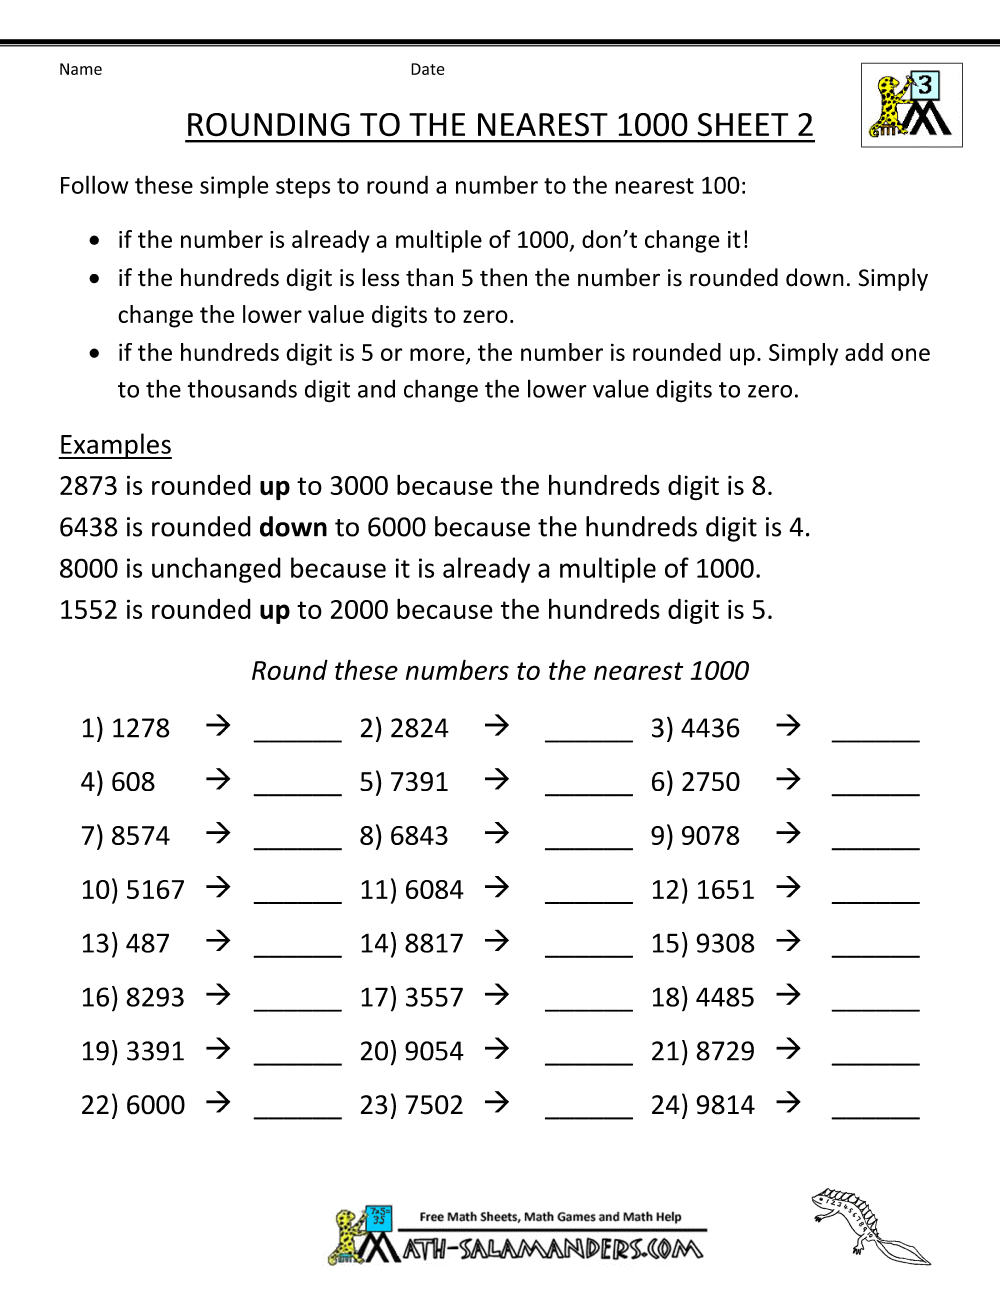 Rounding Worksheet To The Nearest 1000